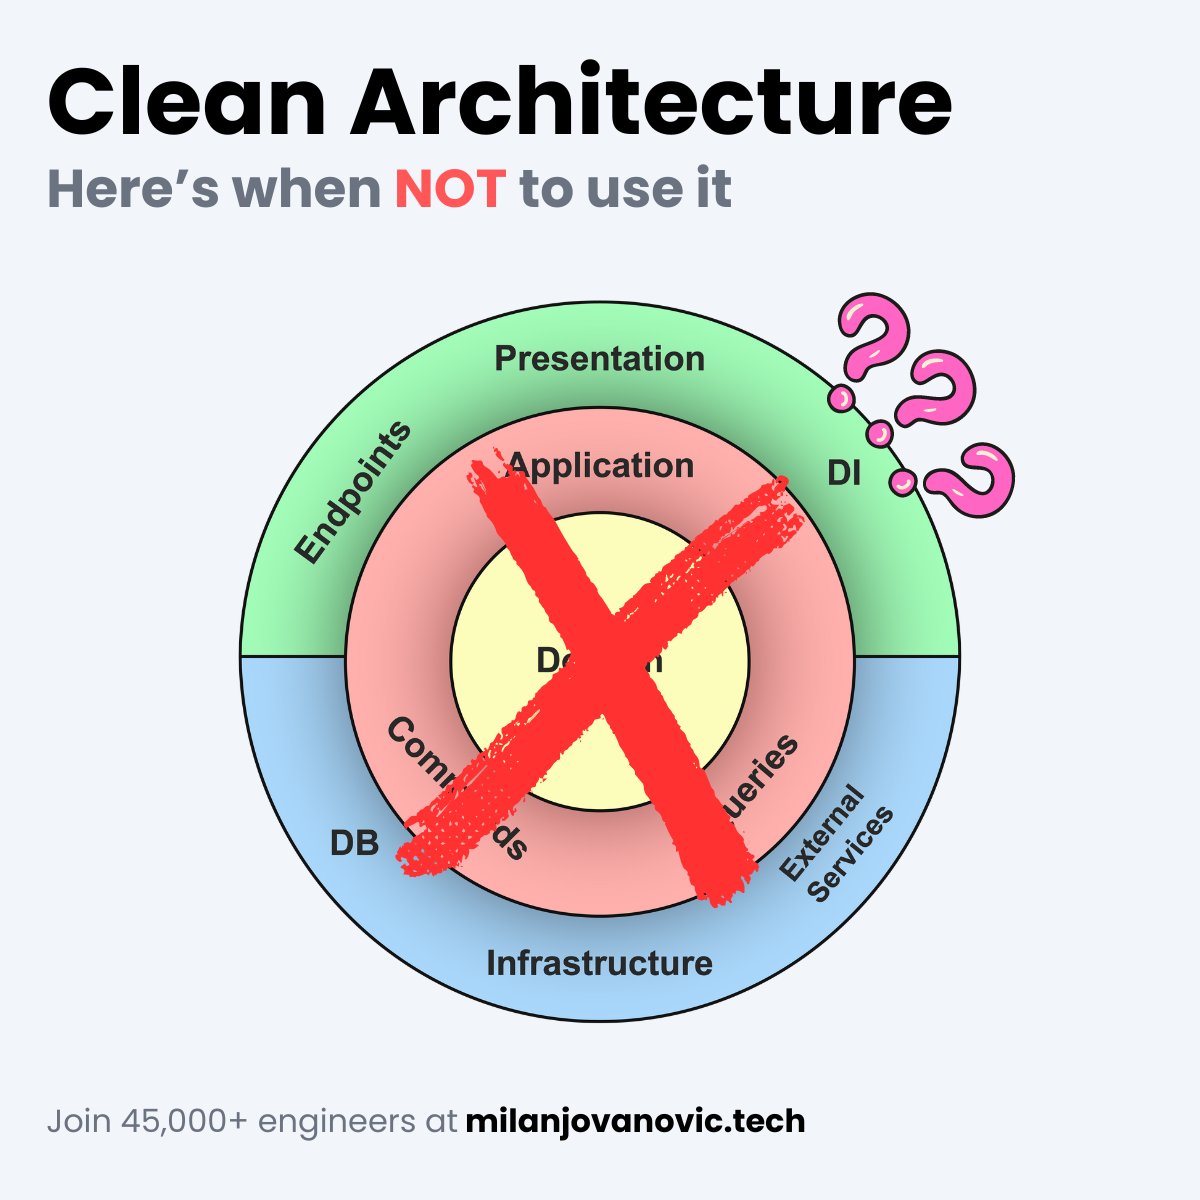 Don't use Clean Architecture if:

- You have a small, simple project
- You are working on a tight deadline
- You have limited resources or expertise

Clean Architecture is a popular architectural approach. It separates the business logic from implementation details.

It also